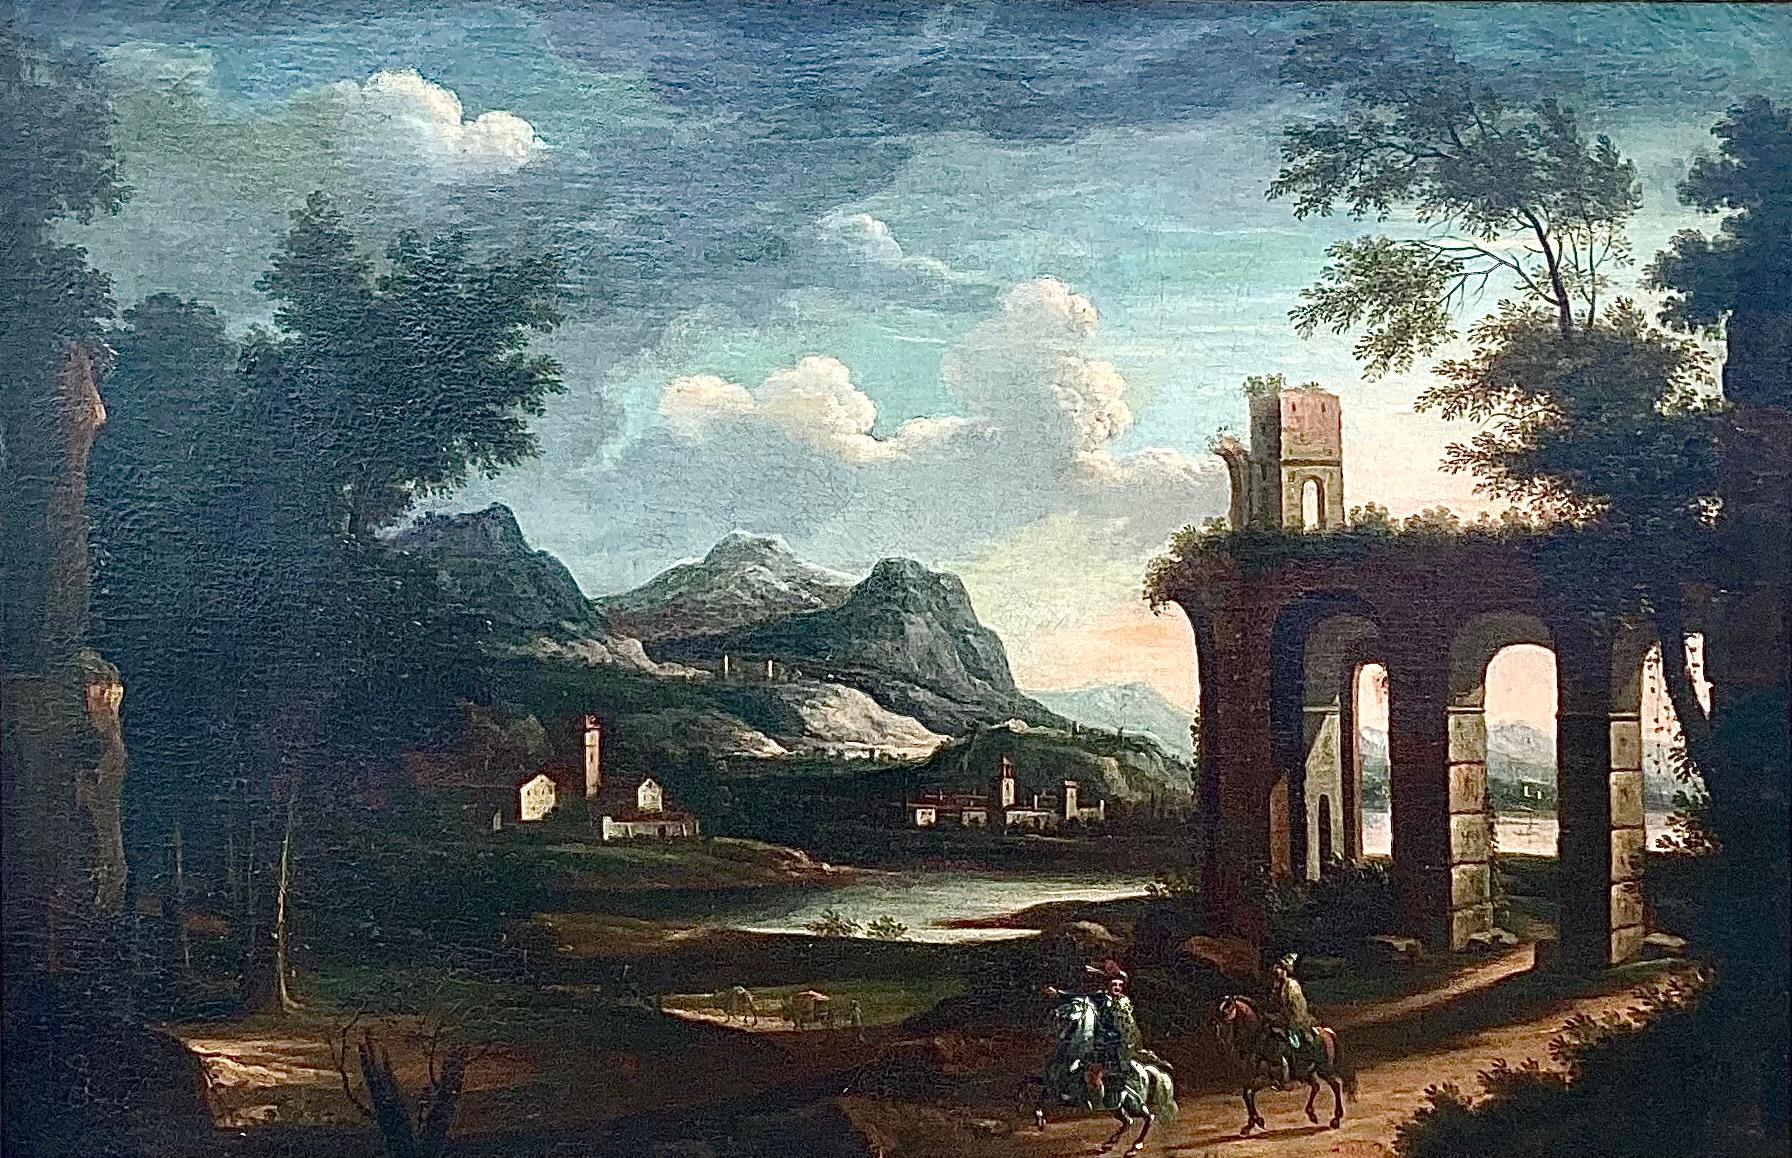 Wood 18th Century Italian Landscape Oil On Canvas Painting For Sale